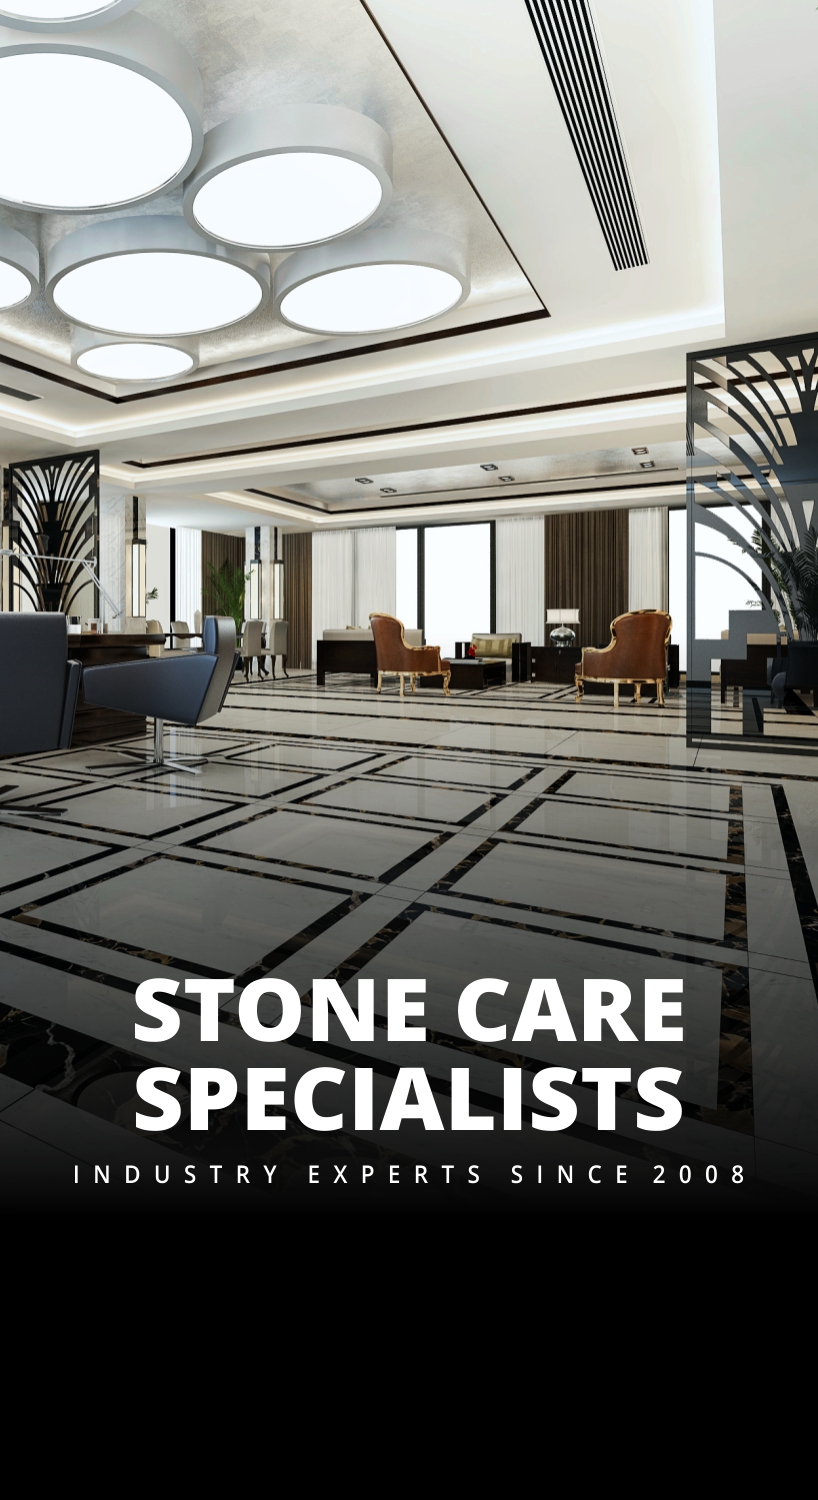 Stone care specialist banner - Marble Magik Corporation